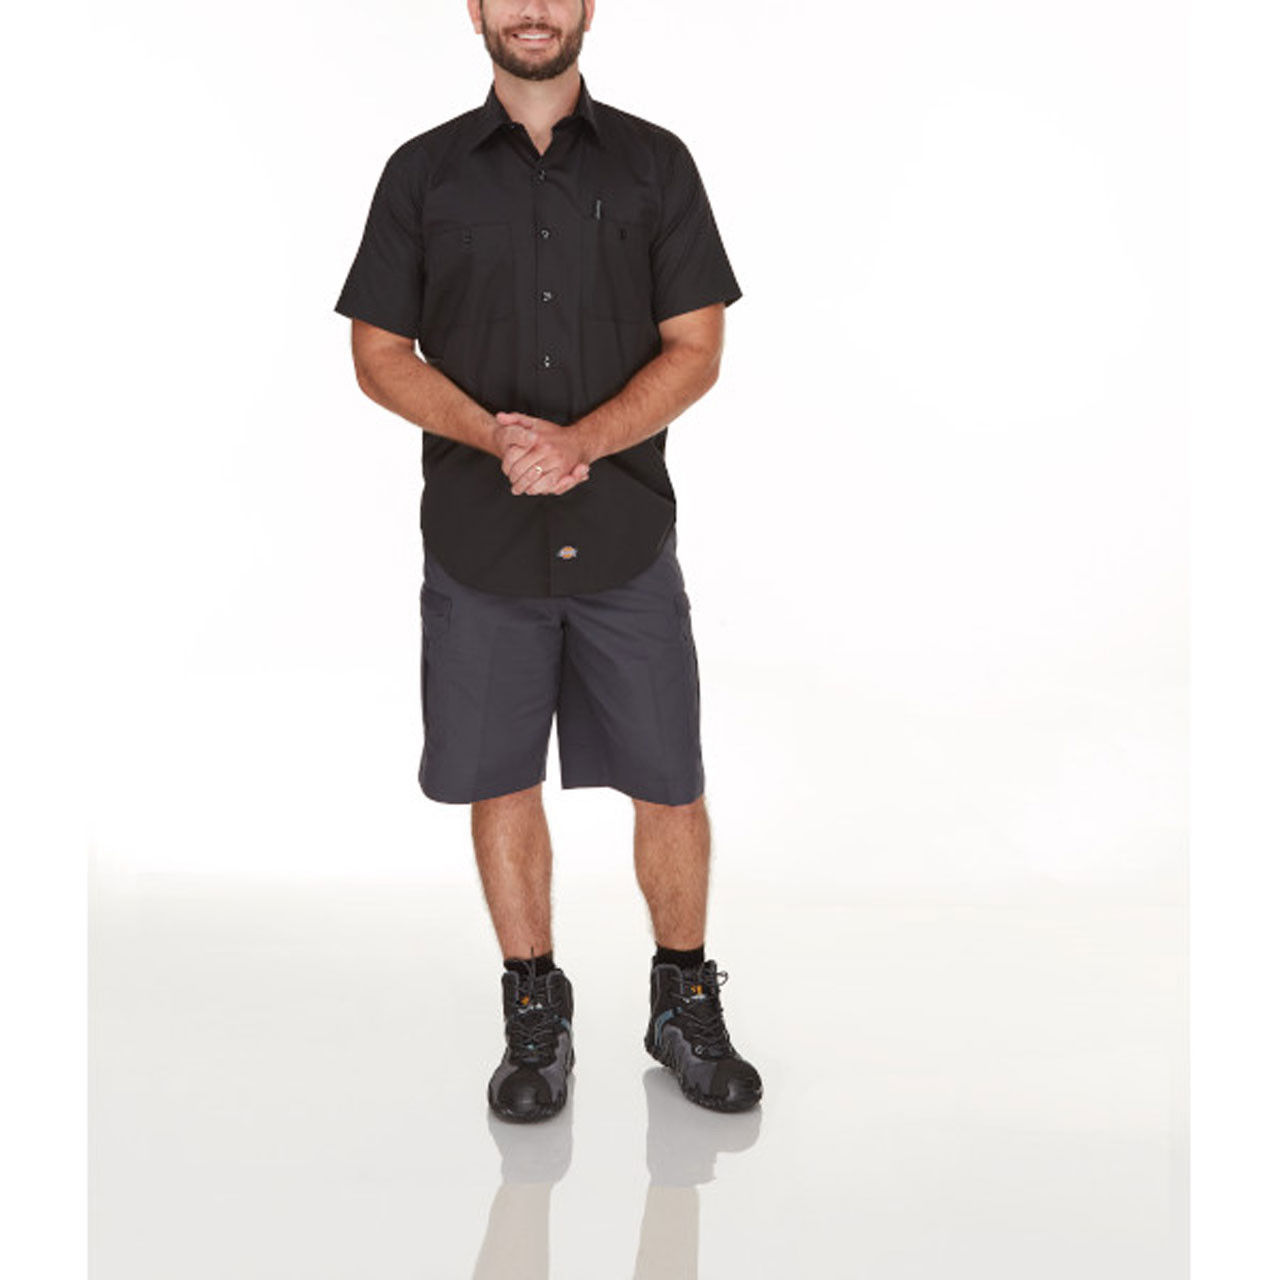 For whom would the Dickies Cooling Work Shirt - LS51 be the ideal cooling work shirt?